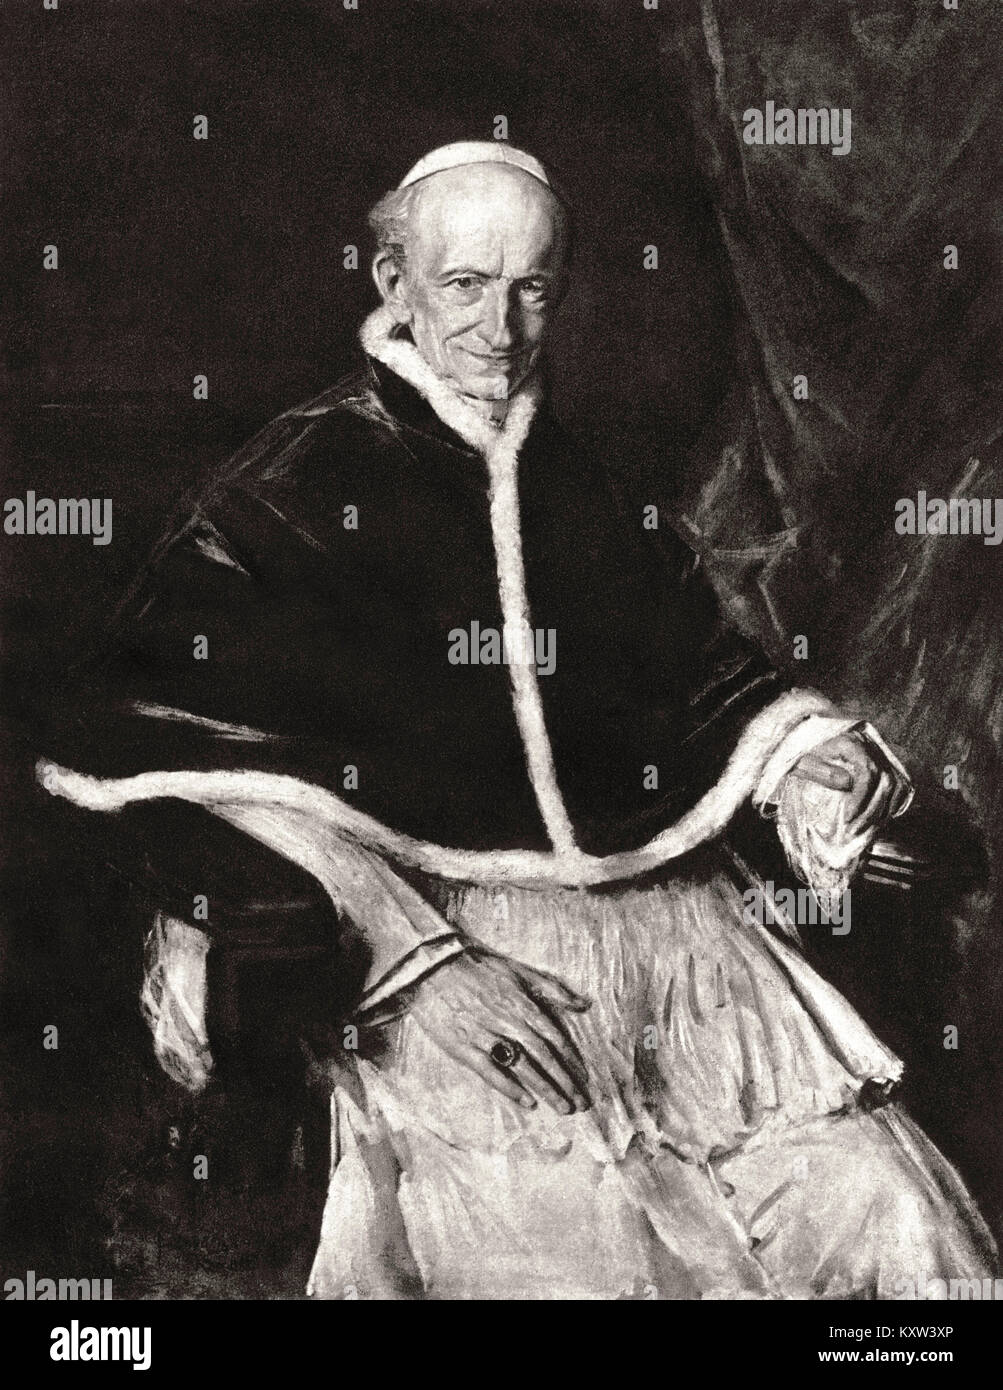 Leo XIII, was Pope from 1878 - 1903, painting by Franz von Lenbach Stock Photo